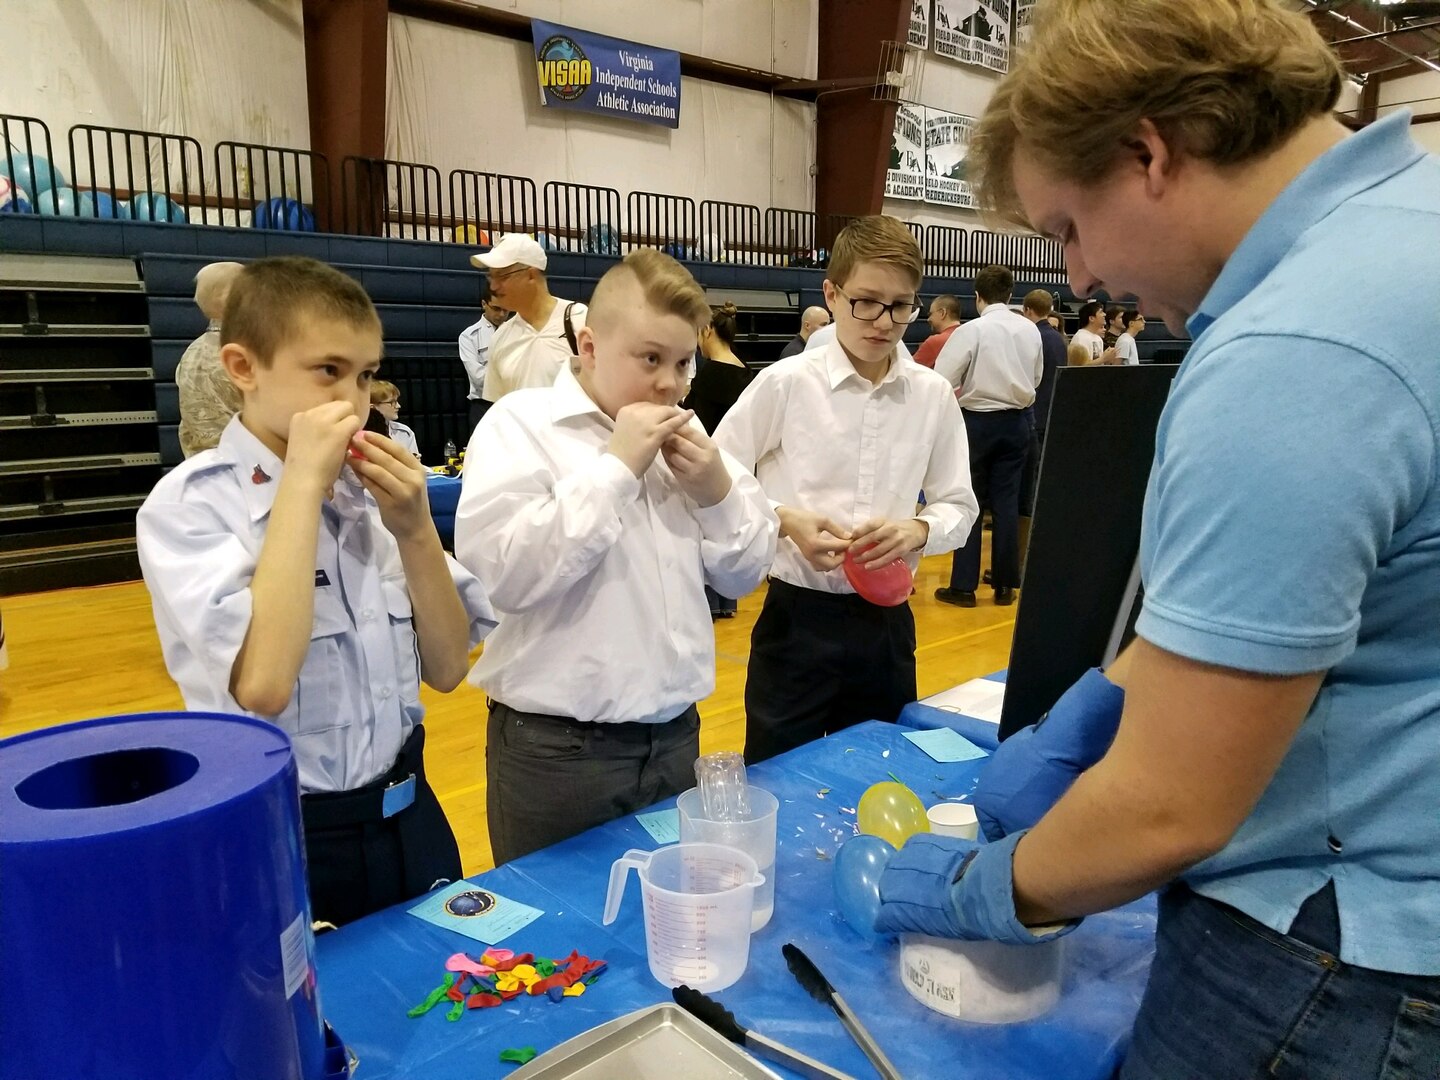 IMAGE: FREDERICKSBURG, Va. - Navy engineer Josh Taylor conducts a liquid nitrogen demonstration with students at the science, technology, engineering and mathematics (STEM) Summit hosted by the Fredericksburg Academy, Feb. 24. Taylor - a Naval Surface Warfare Center Dahlgren Division (NSWCDD) STEM mentor - and the students discussed the Ideal Gas Law, and how it relates different attributes of a fluid. In the picture, they are exposing the inflated balloons to liquid nitrogen and observing that the volume of air inside the balloons decreased as the temperature decreased. Taylor and the students then discussed and demonstrated how changes in temperature could be used to produce kinetic energy, and how temperature changes could affect the behavior of materials. For example, they made flowers shatter like glass, tennis balls that would not bounce, and rubber bands that cracked. 
    "I really enjoyed talking to students and answering their questions, not just about basic principles, but introducing concepts that one doesn't normally explore until college," said Taylor. "I think Dahlgren mentors play a crucial part at venues like this because we help students make a connection between ideas they learn in school and real work they could do one day. Personally, I've met many students who were inspired by events like this to engage the sciences and applied sciences not just as homework - but as a vocation."